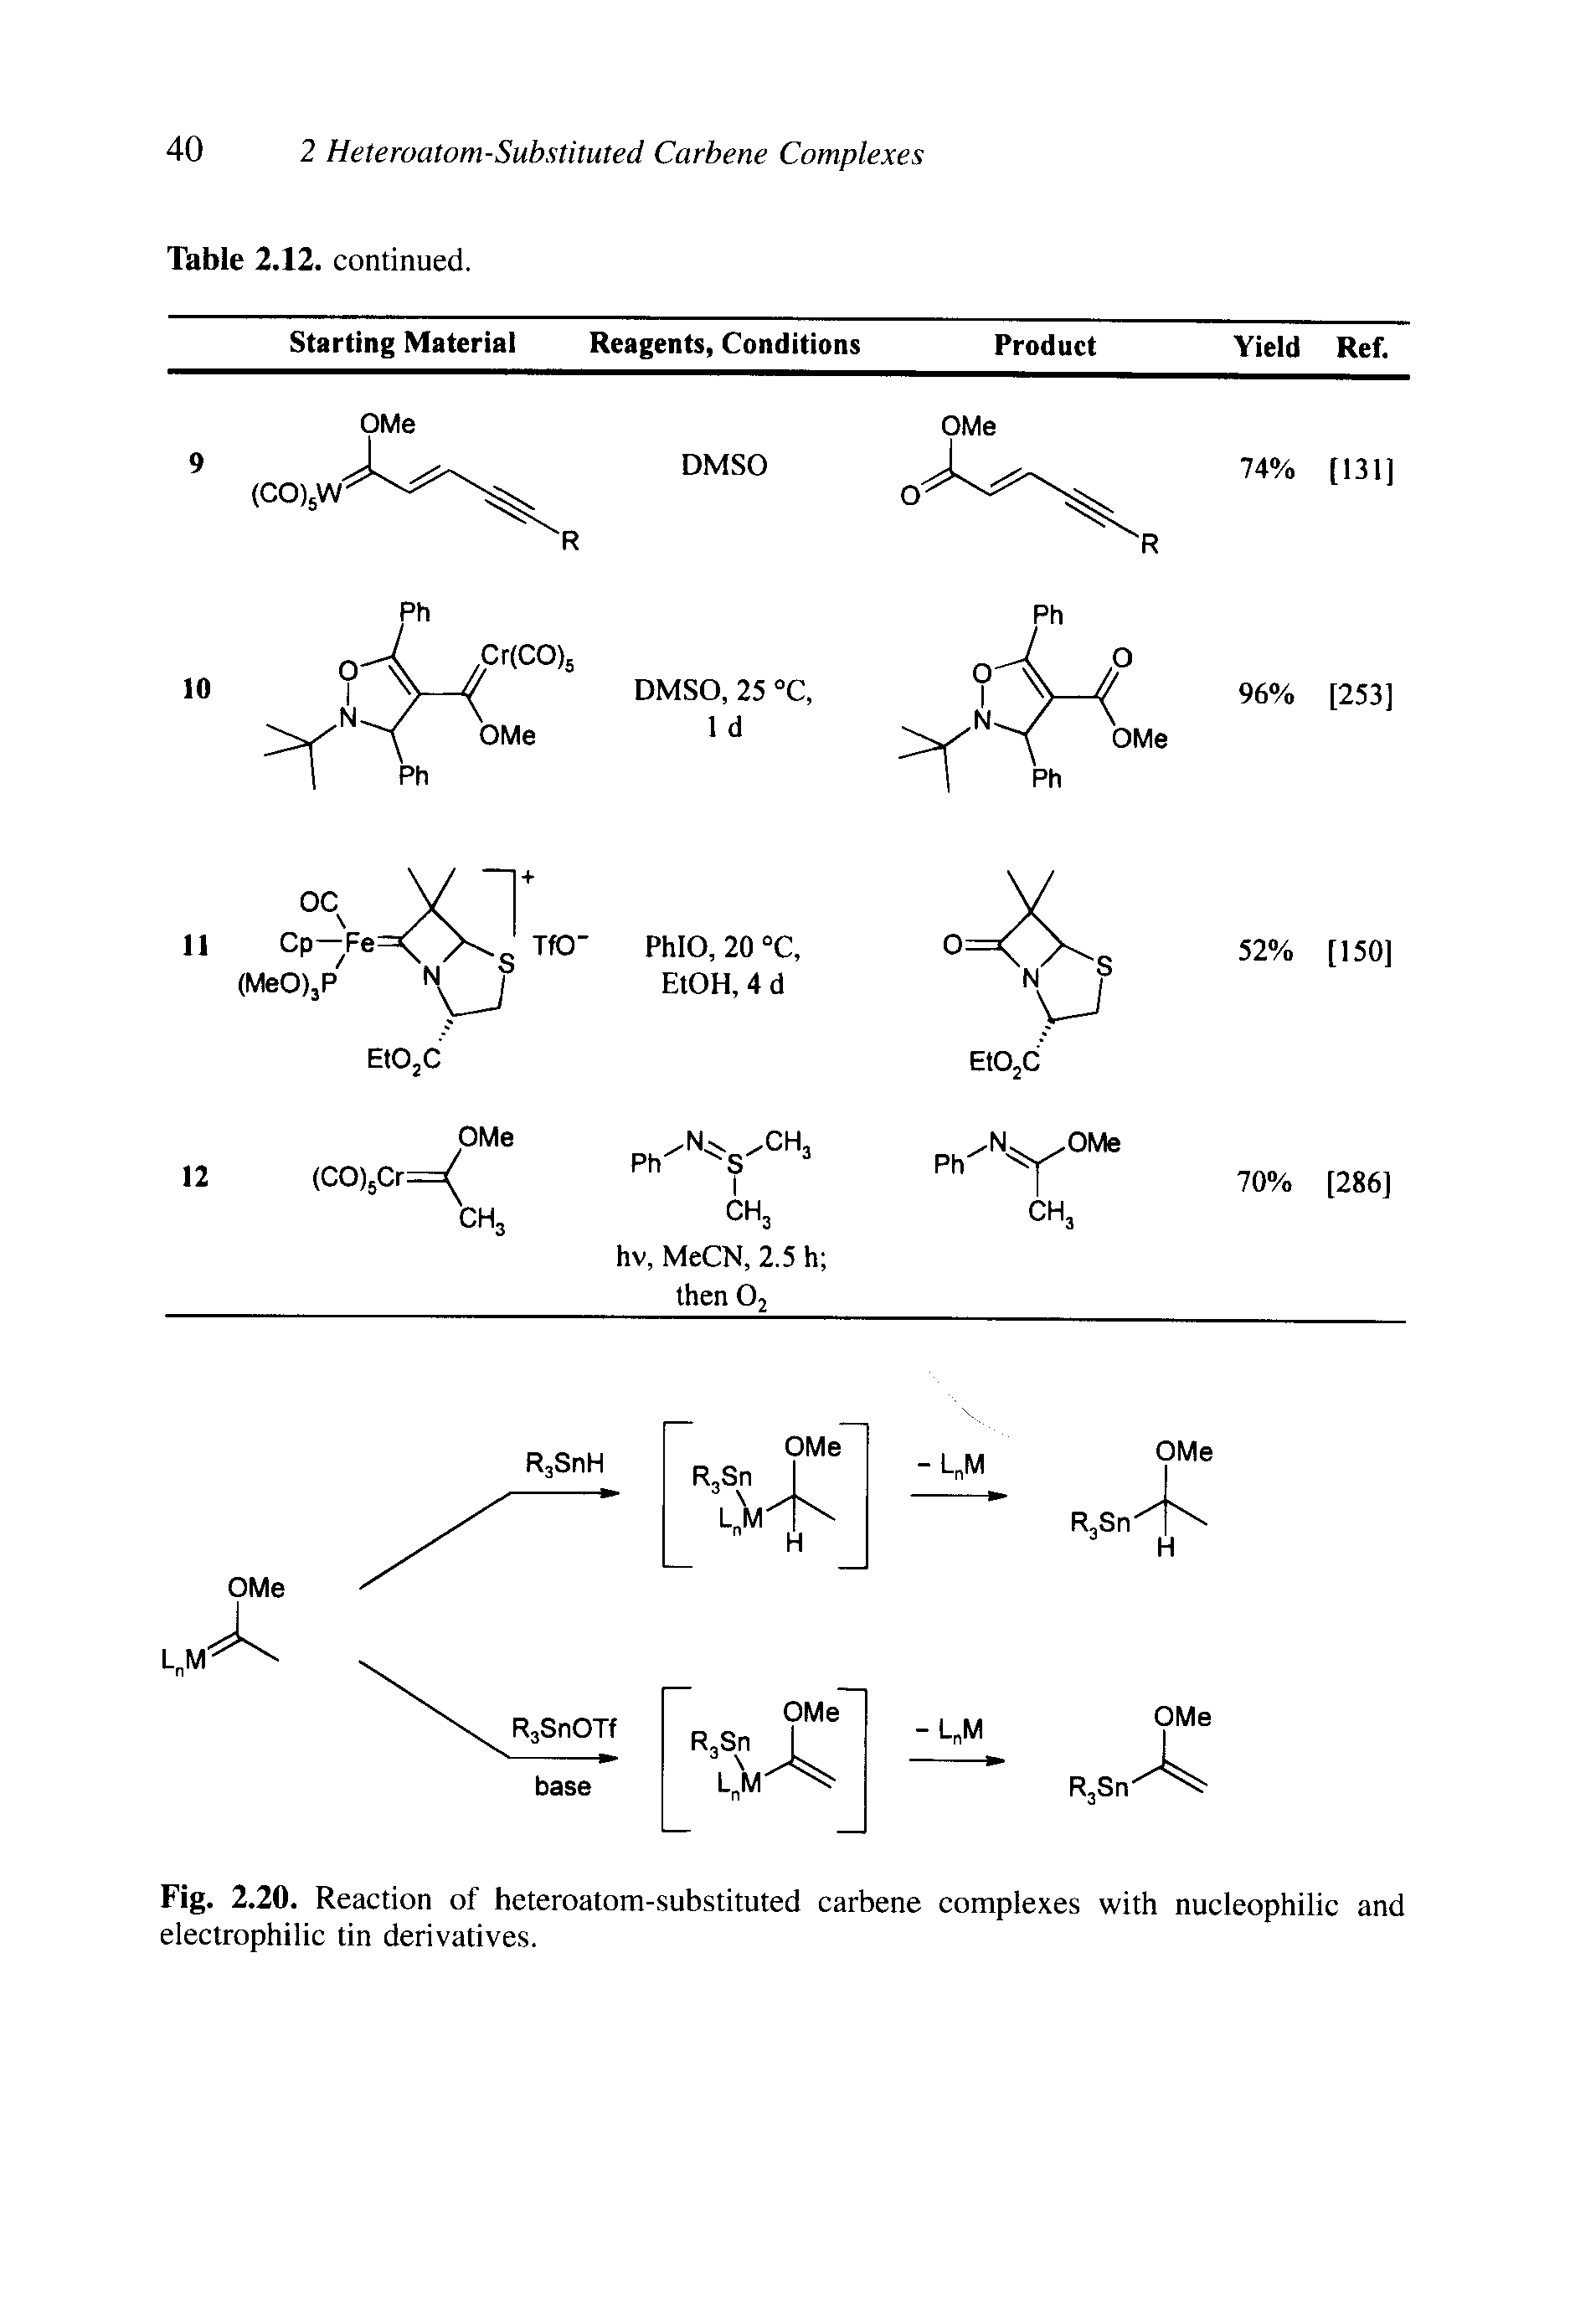 Fig. 2.20. Reaction of heteroatom-substituted carbene complexes with nucleophilic and electrophilic tin derivatives.